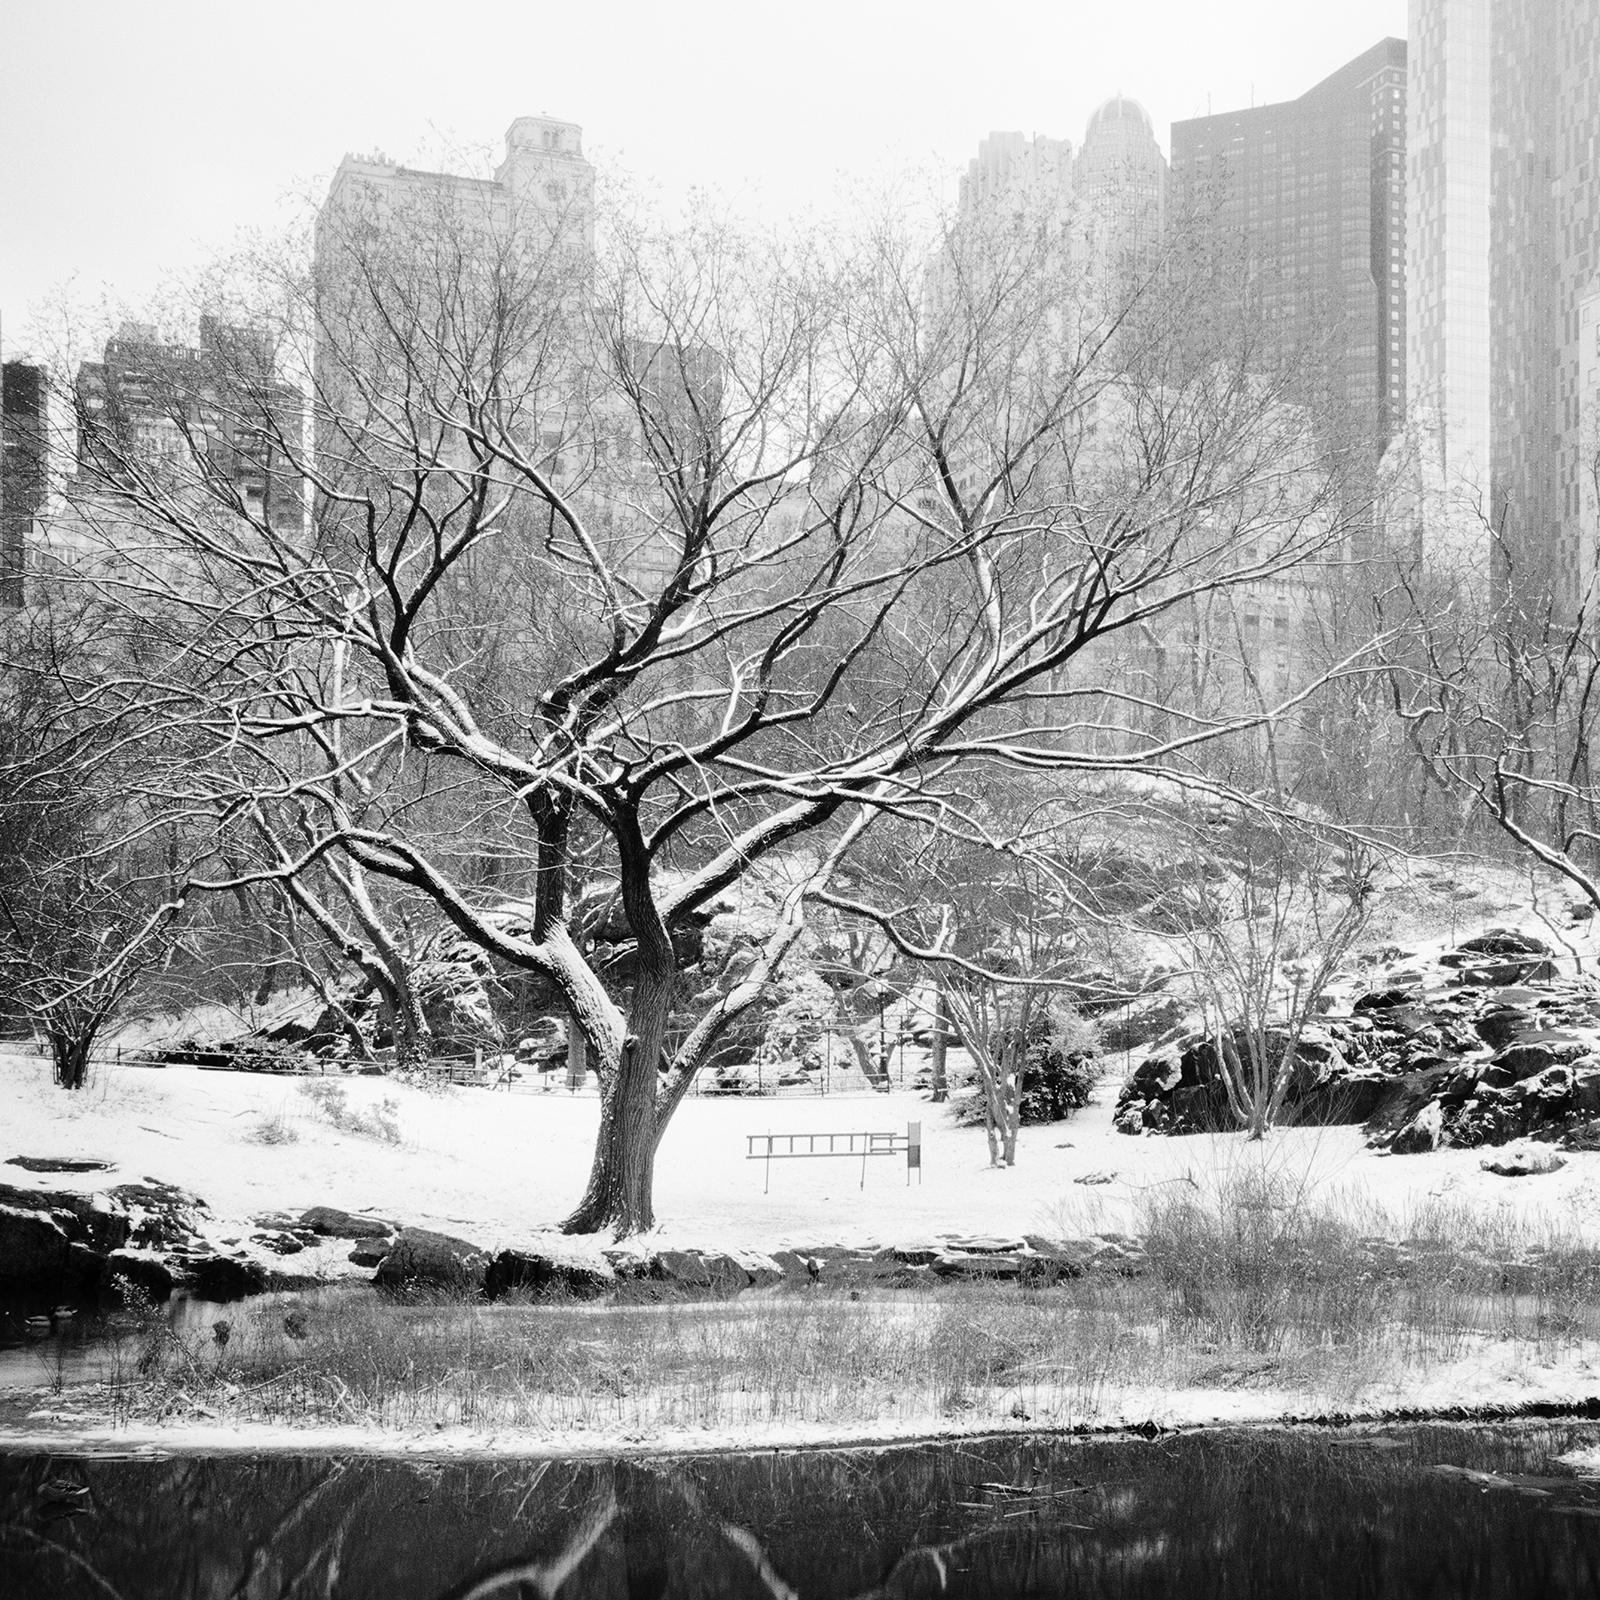 Black and whitefine art cityscape - landscape photography. Central park in winter with snow and the unique skyline in the background, New York City, USA. Archival pigment ink print, edition of 9. Signed, titled, dated and numbered by artist.